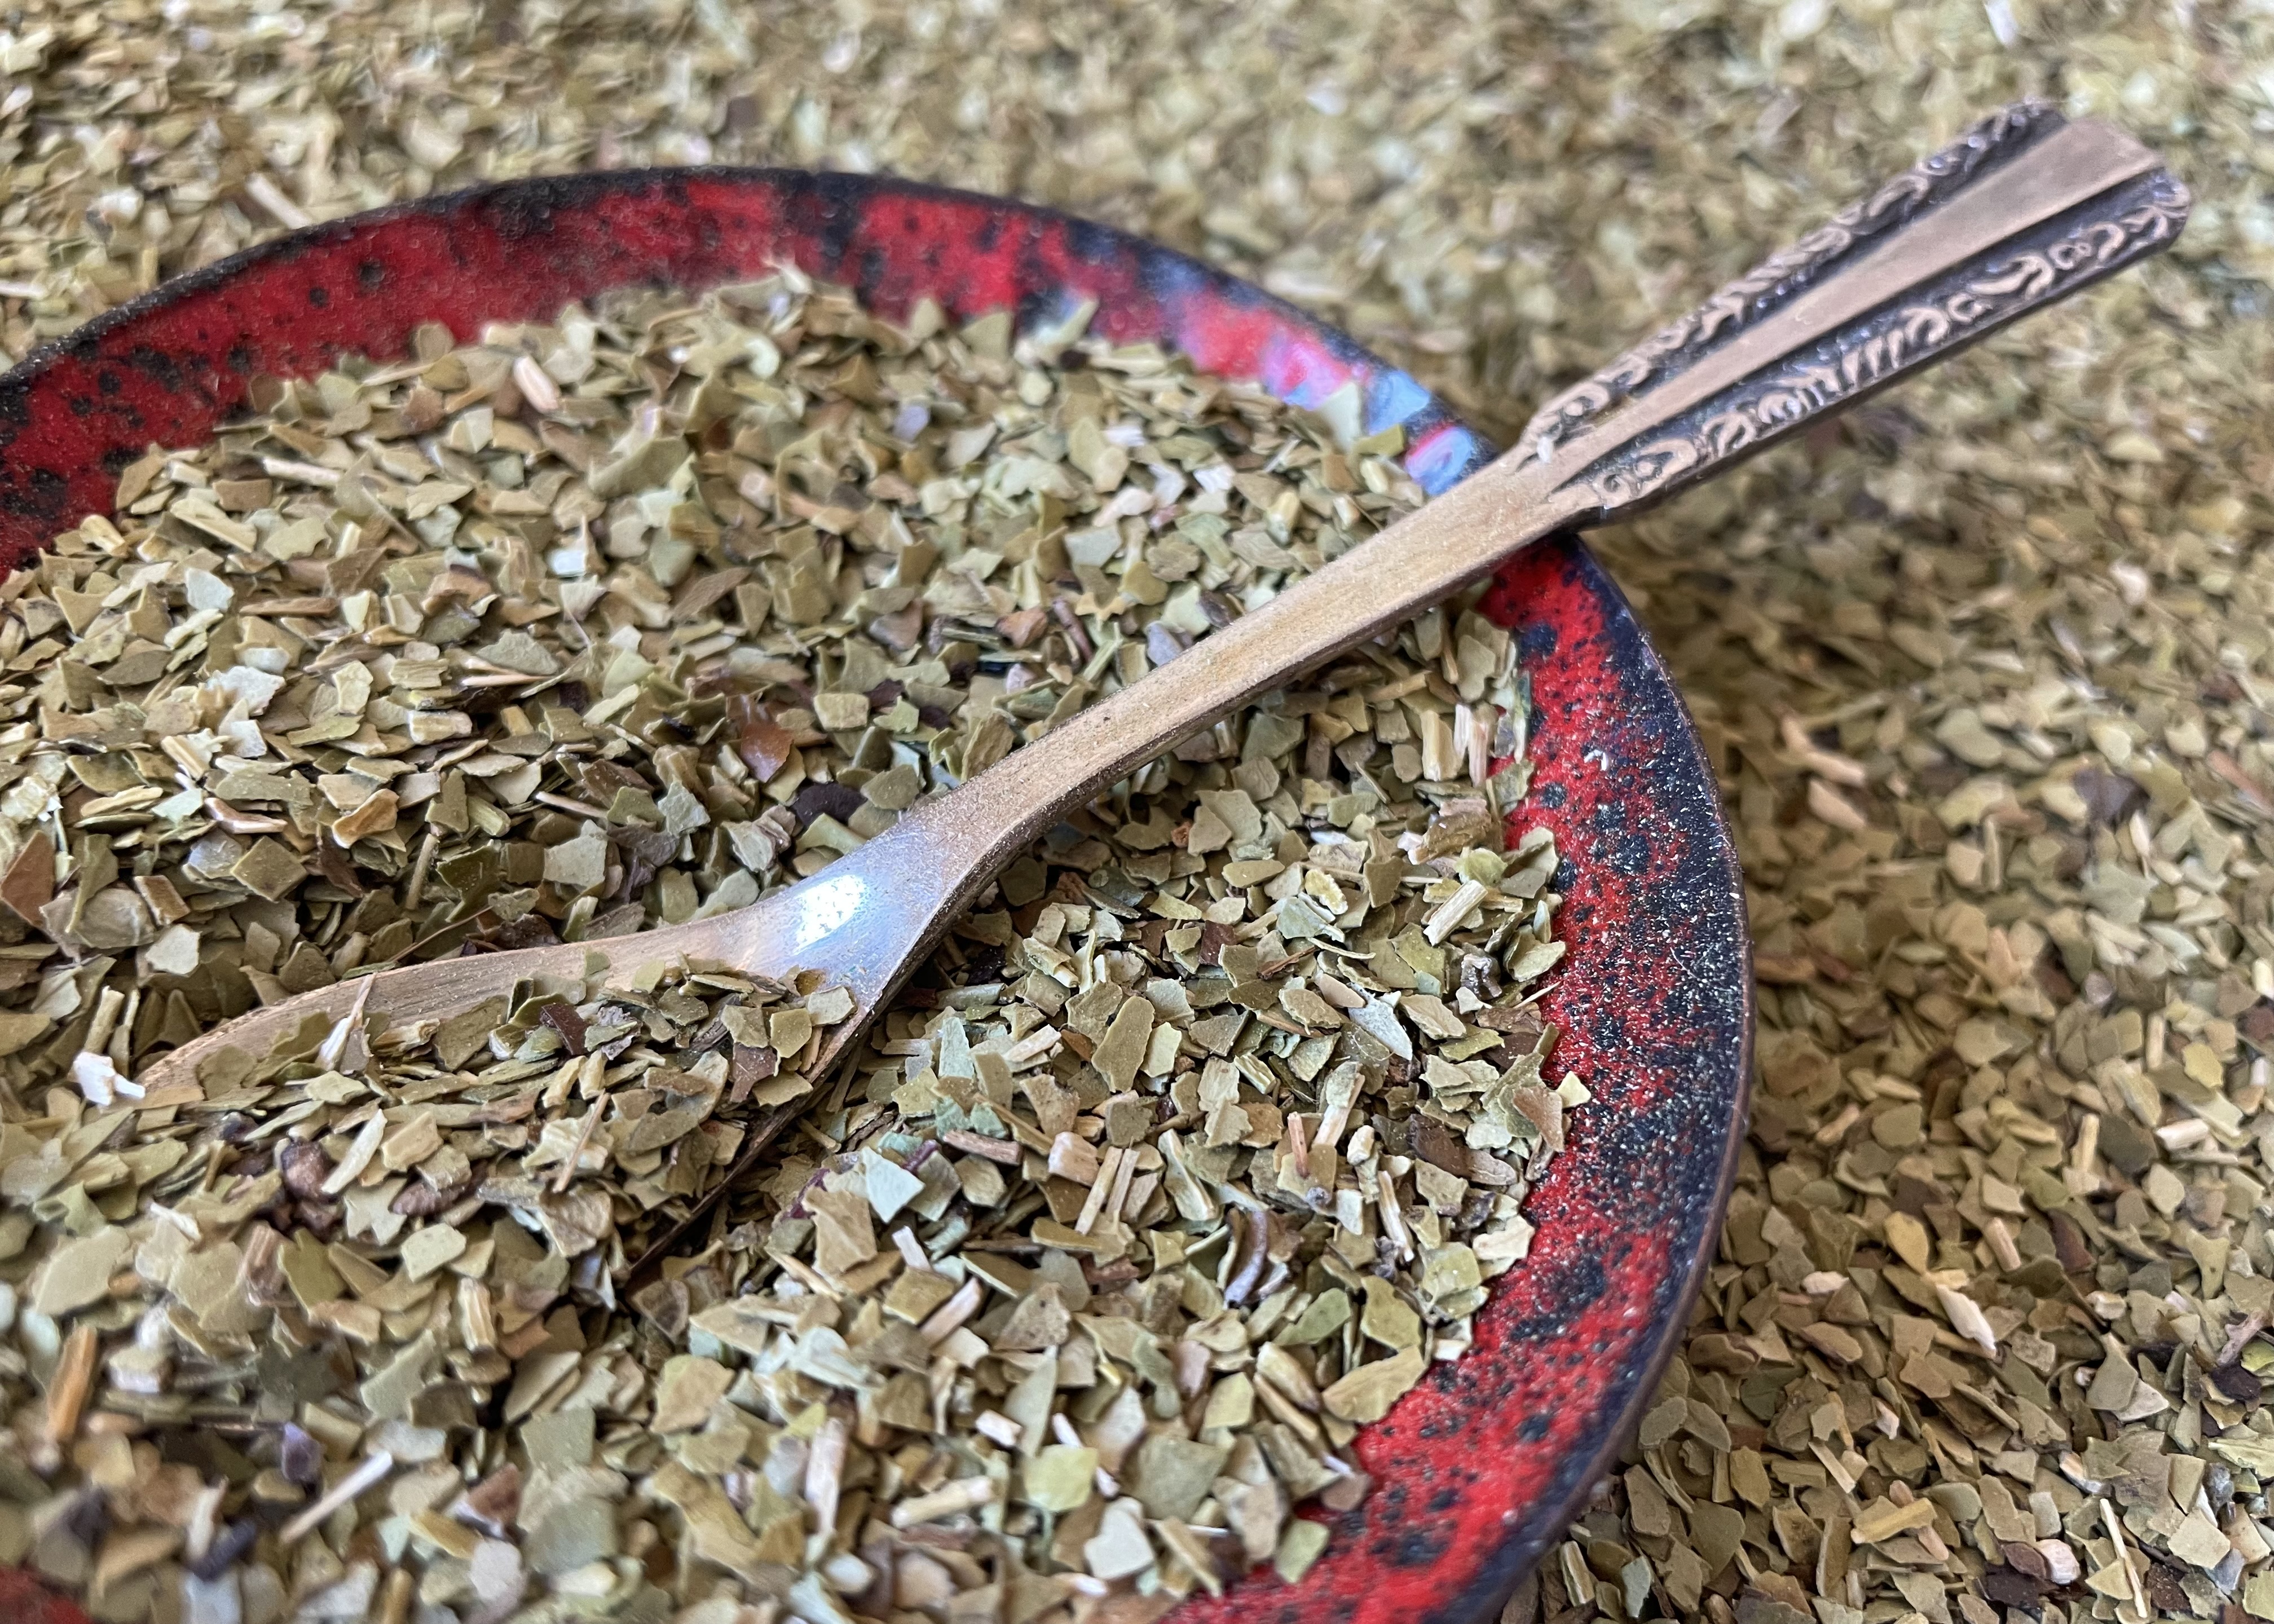 Loose Natural Green Mate Tea in a red bowl with silver spoon